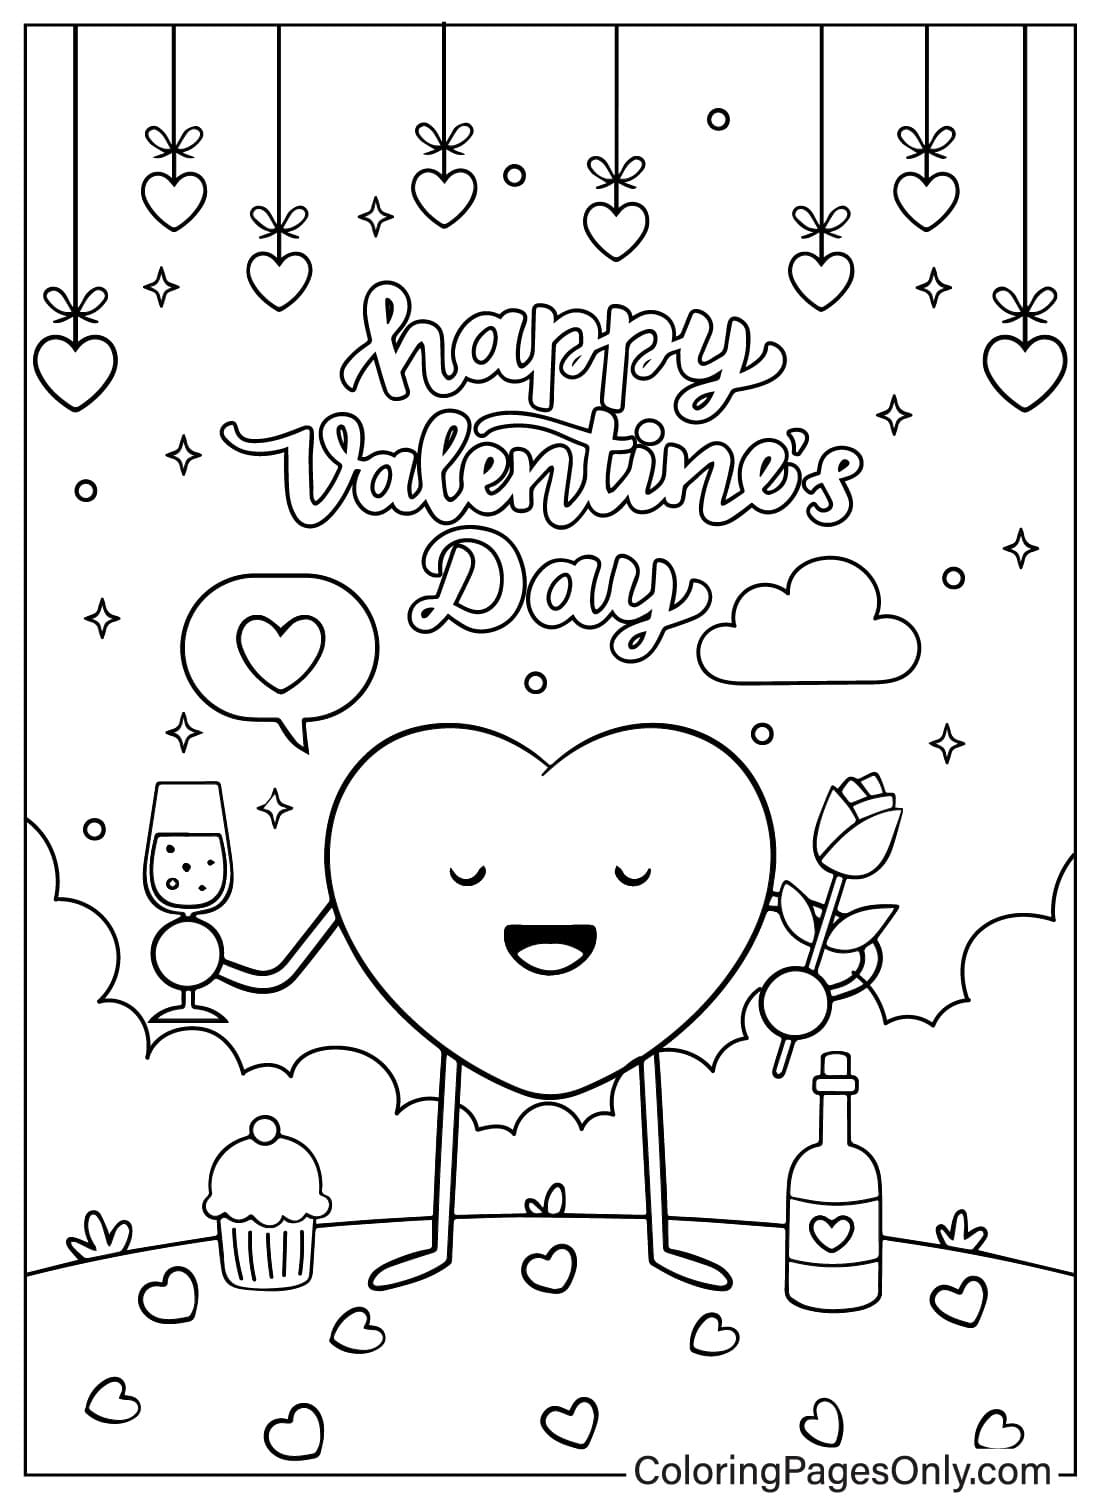 Valentines Day Coloring Page to Printable Free Printable Coloring Pages